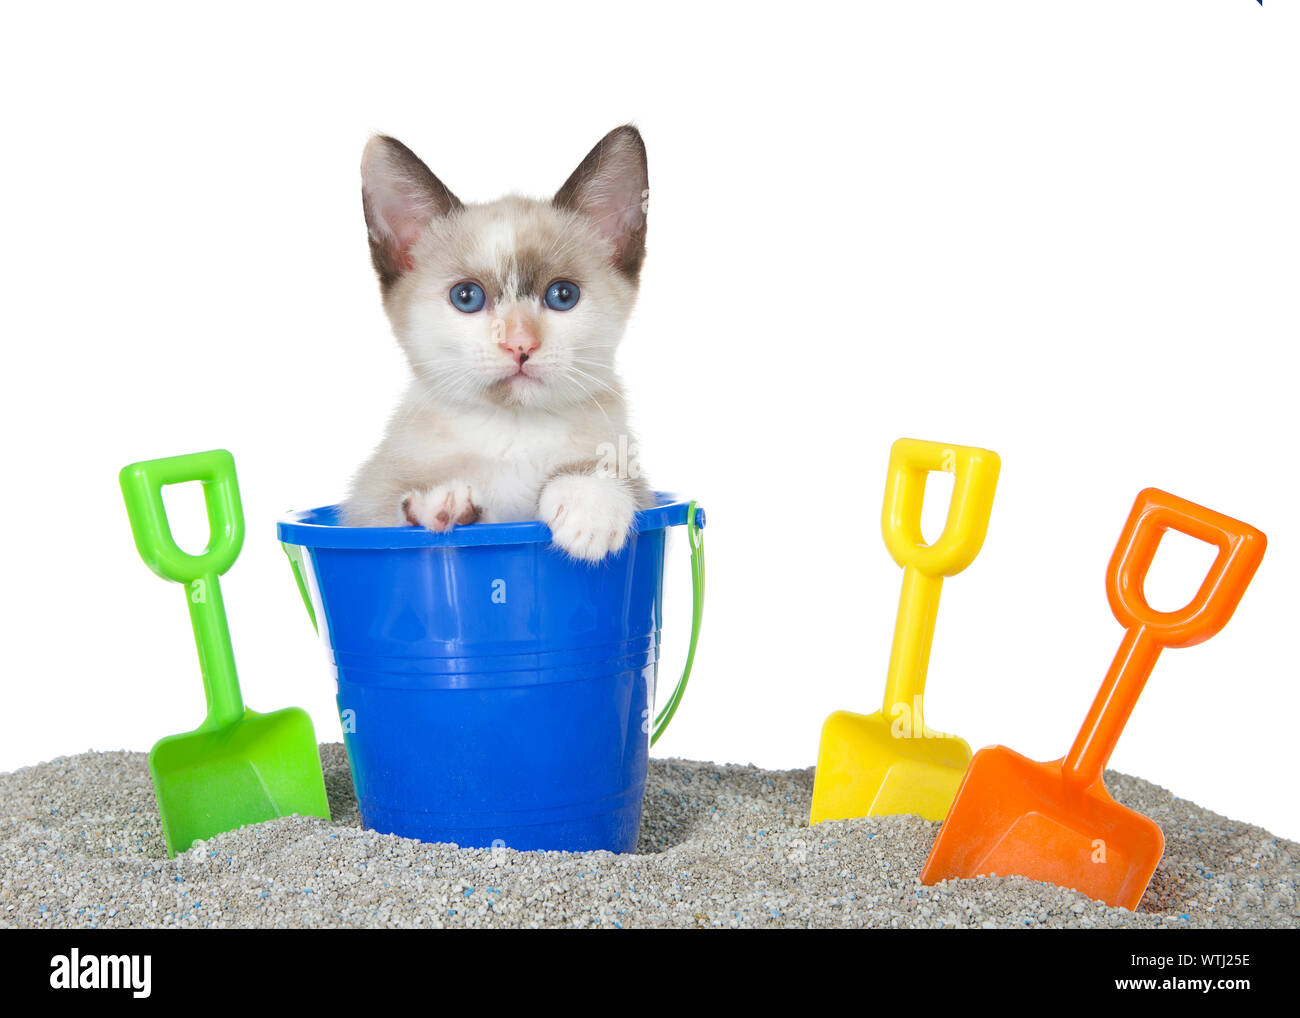 Cute Siamese mix kitten popping out of a toy sand bucket on a kitty litter sand beach with colorful shovels, isolated on white. Fun animal antics, sum Stock Photo